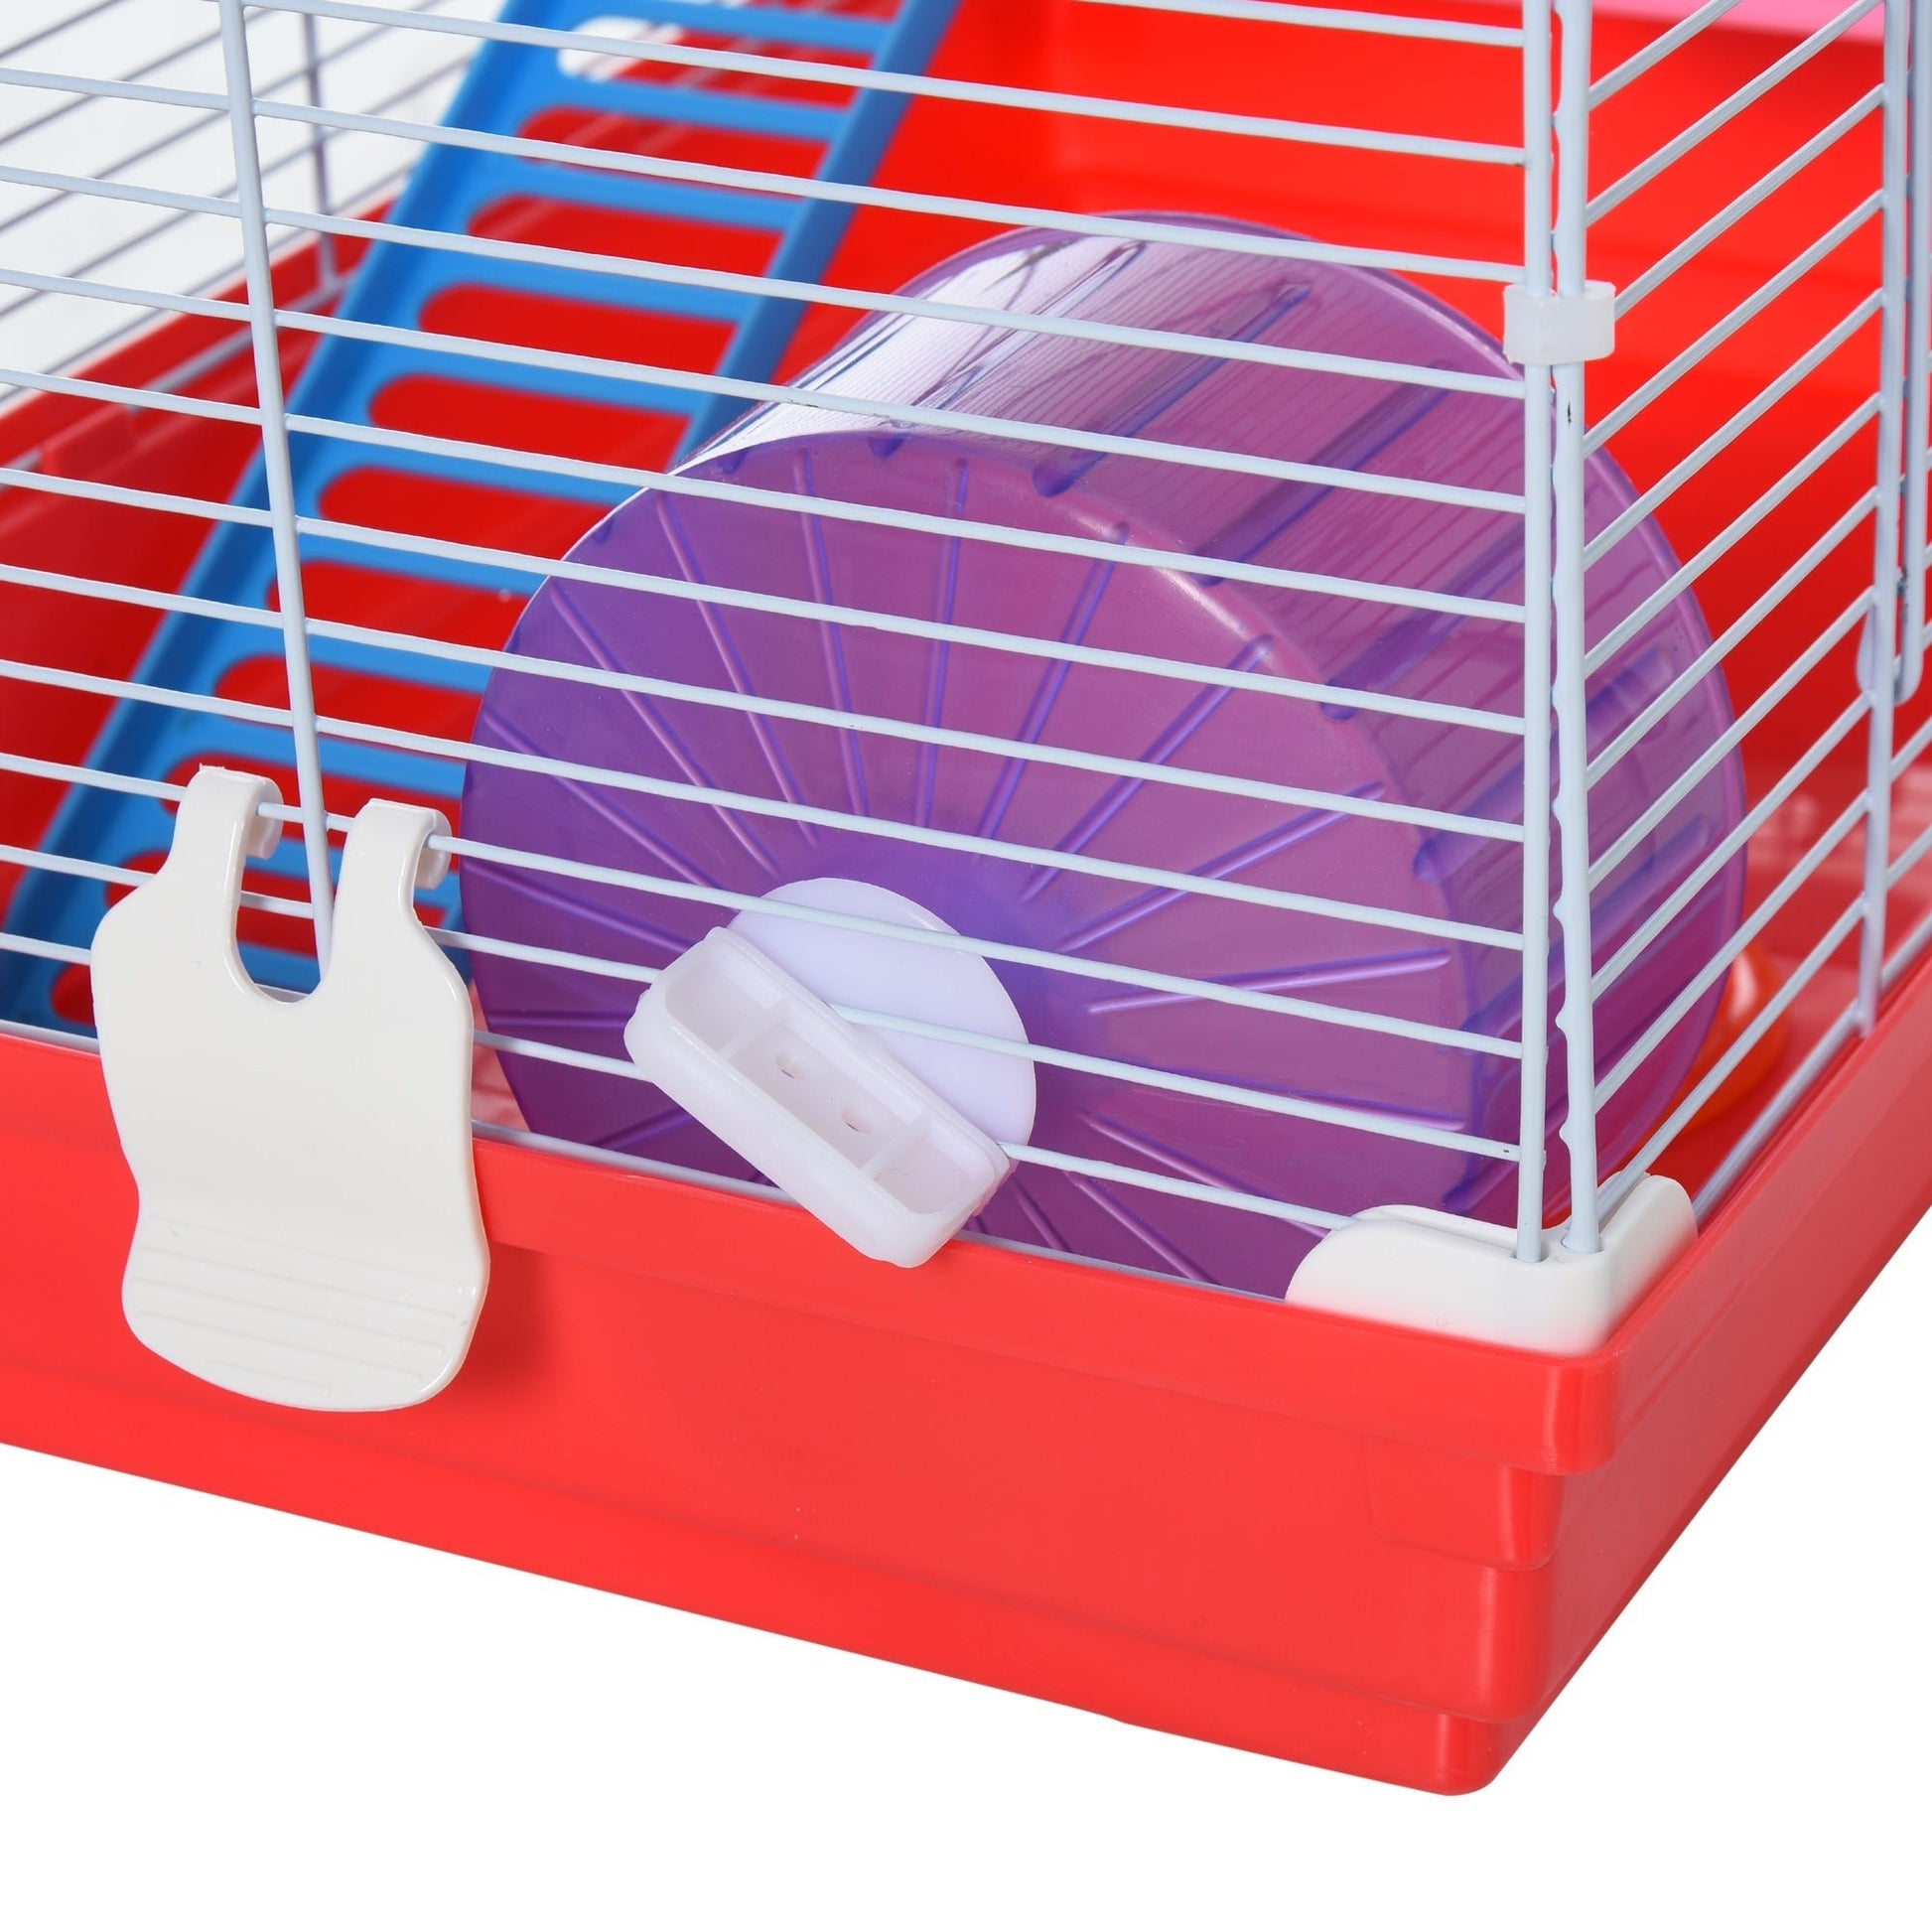 18.5'' Hamster Cage with Exercise Wheel and Water Bottle Dishes, Rat House and Habitats 2 Storey Design, Red at Gallery Canada